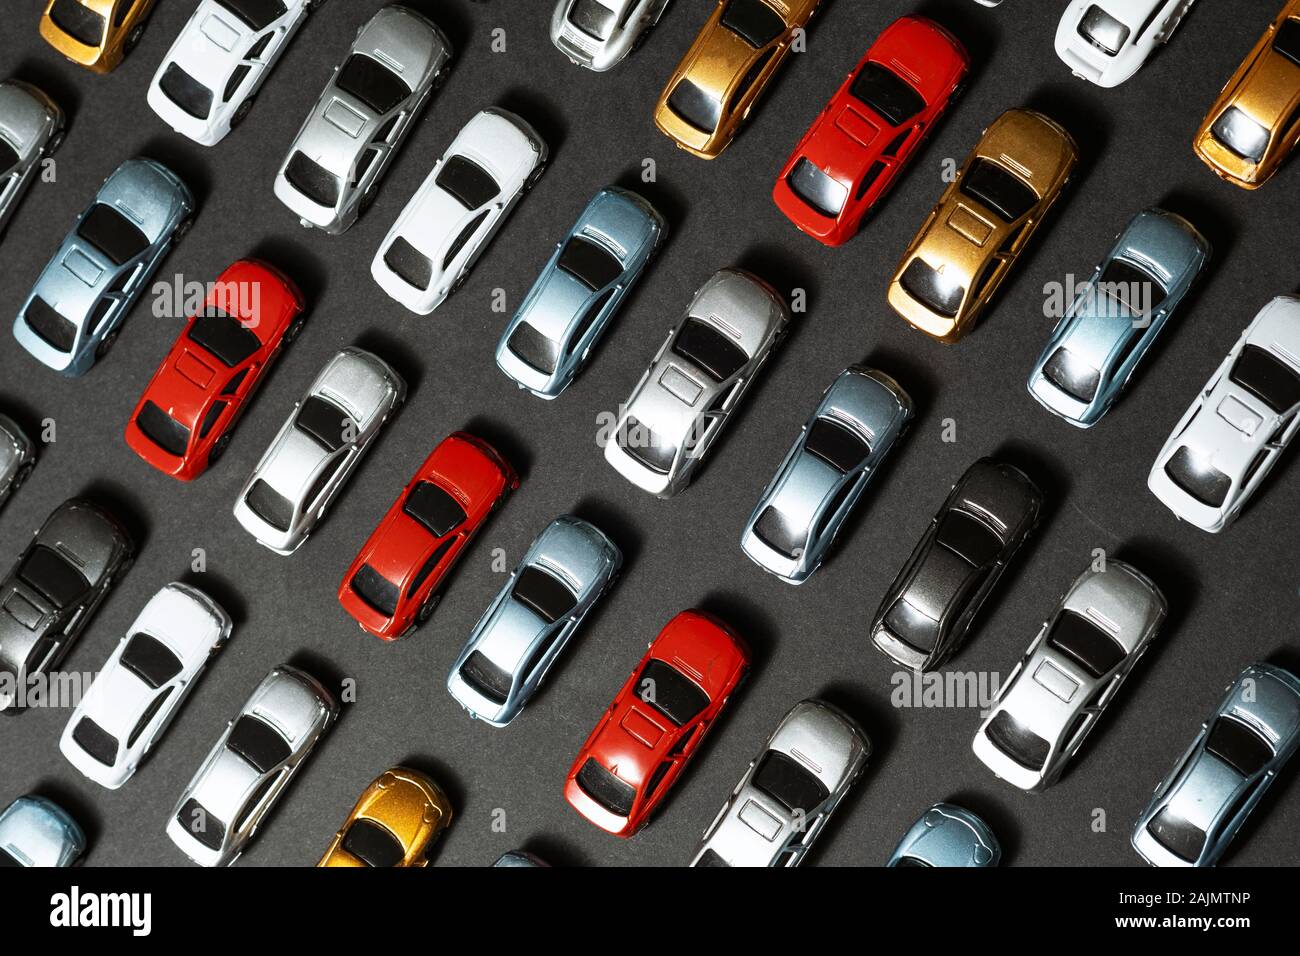 Top view of Parked toy cars on a black background like a car parking lot. Stock Photo